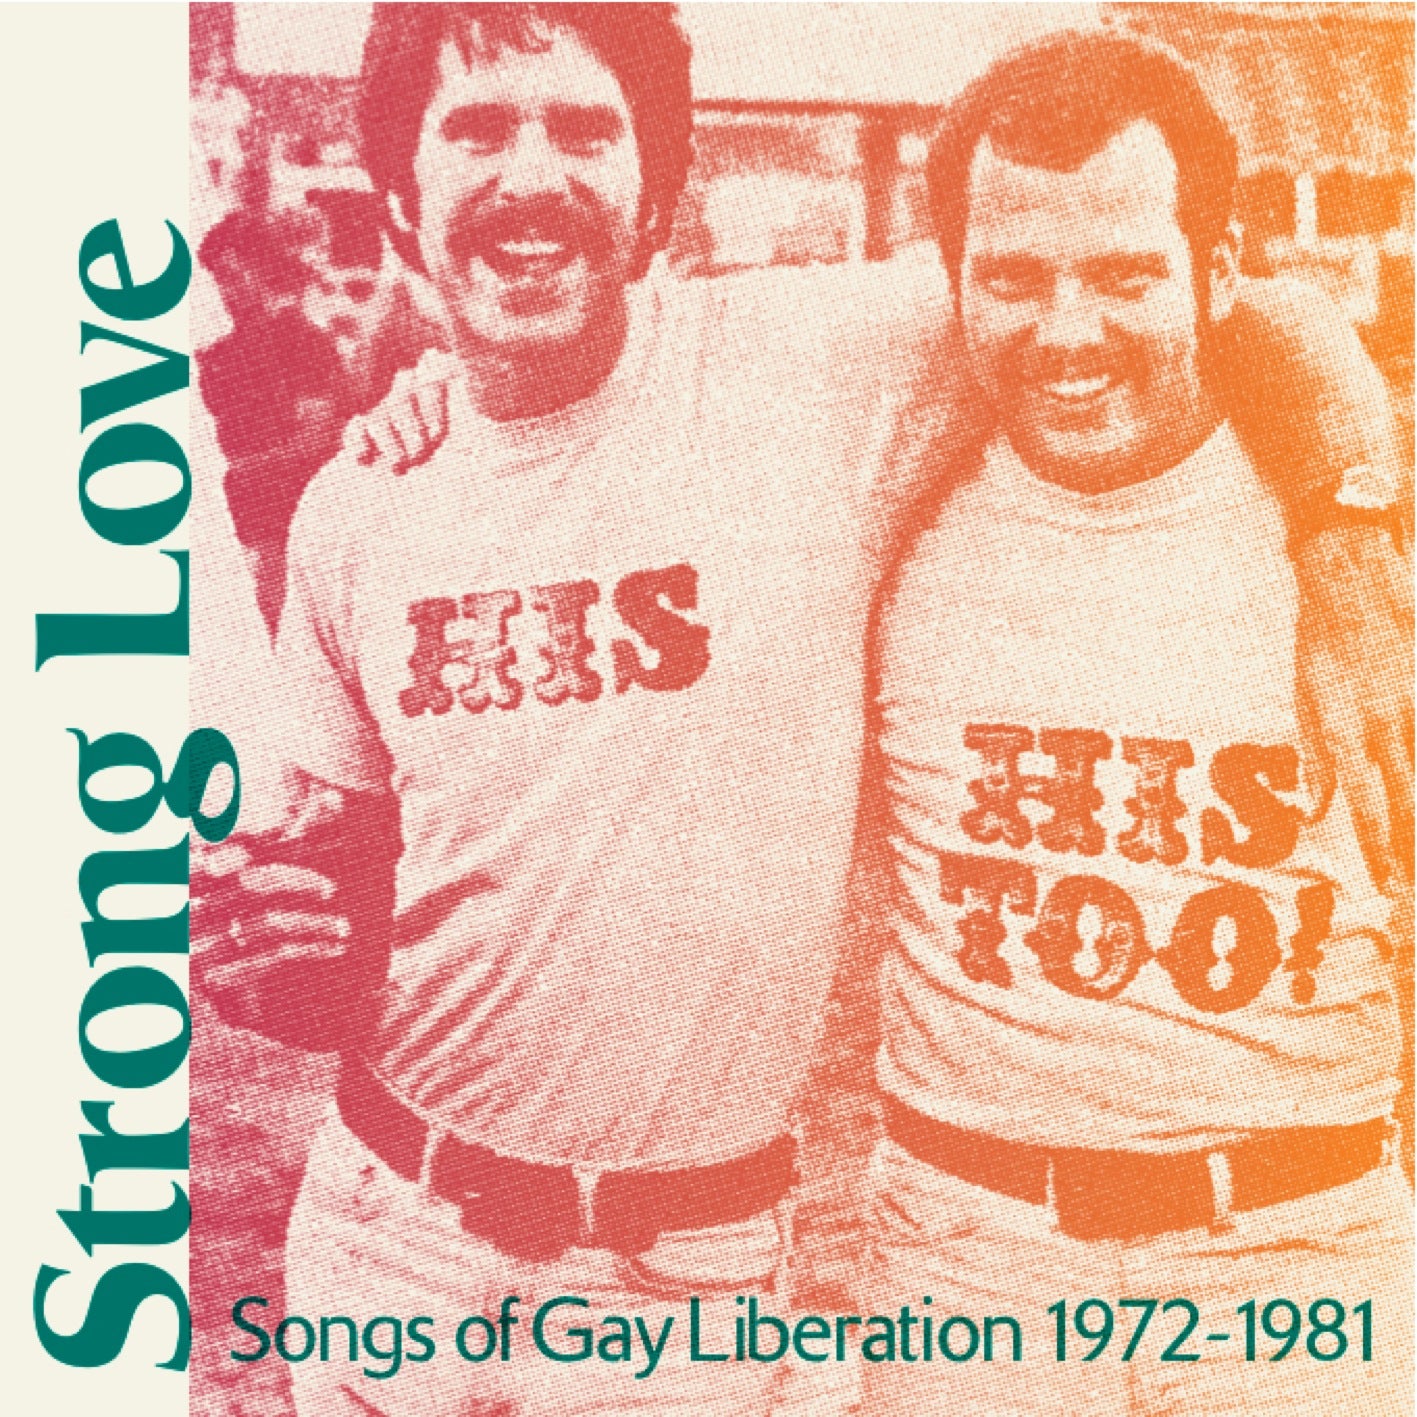 V/A - Strong Love: Songs of Gay Liberation 1972-1981